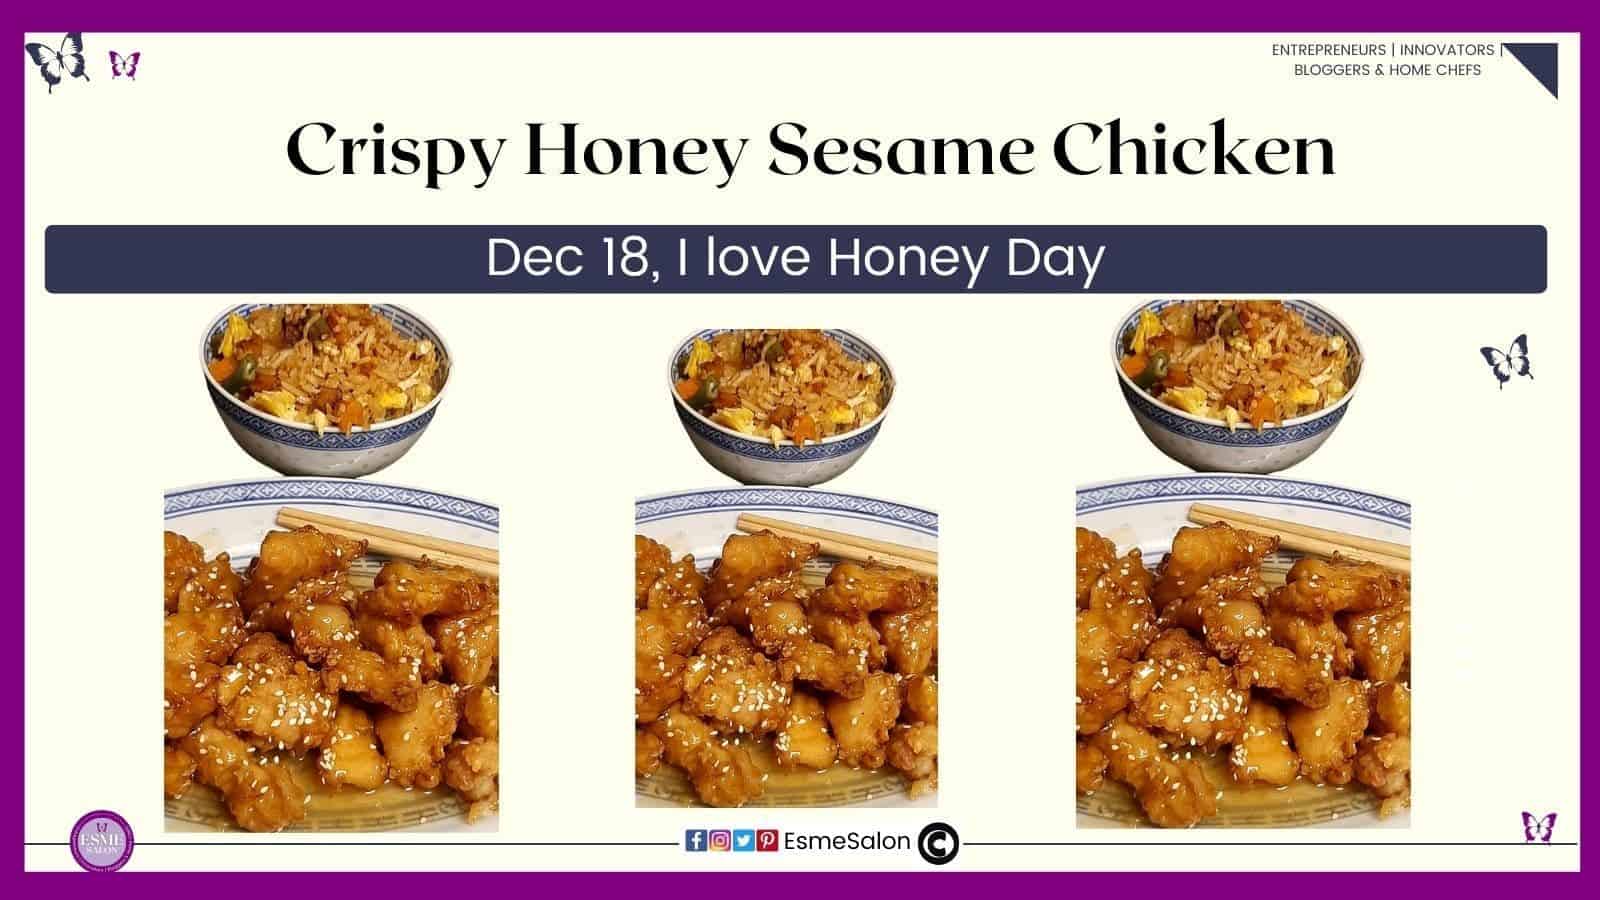 an image of a plate with Crispy Honey Sesame Chicken with sesame seeds and a bowl of rice